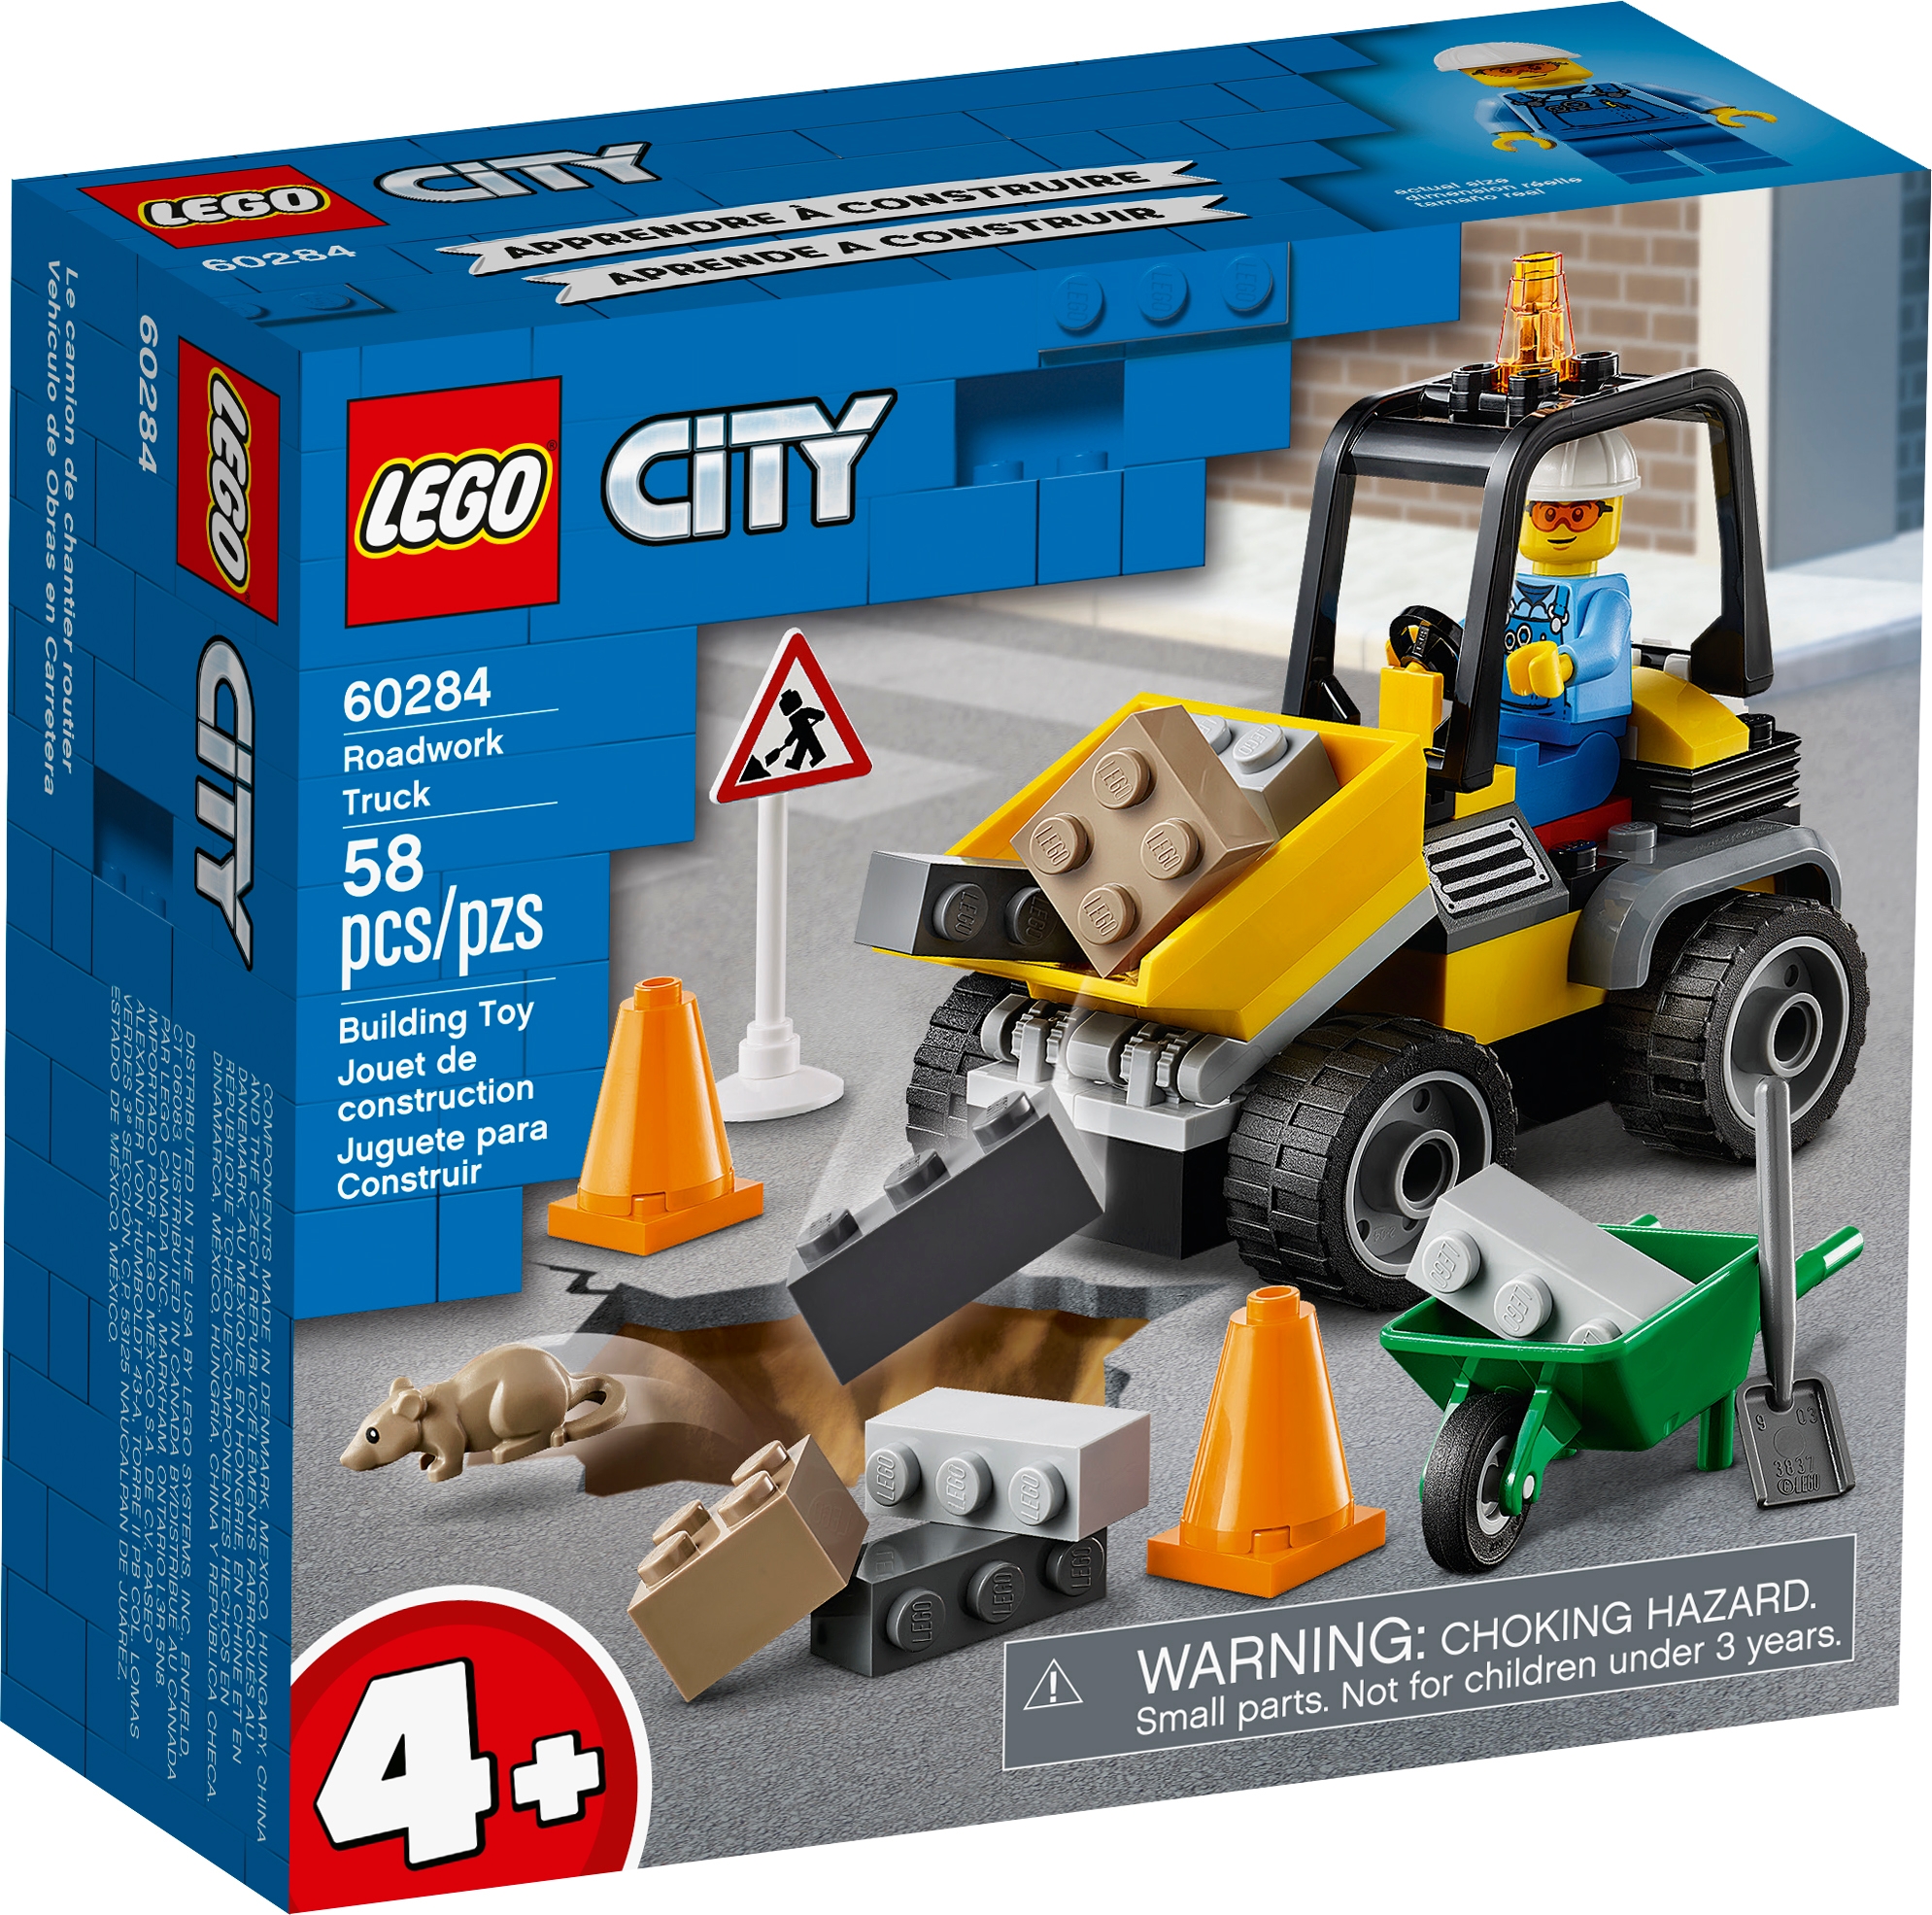 Roadwork Truck 60284 | City | Buy online at the Official LEGO® Shop US